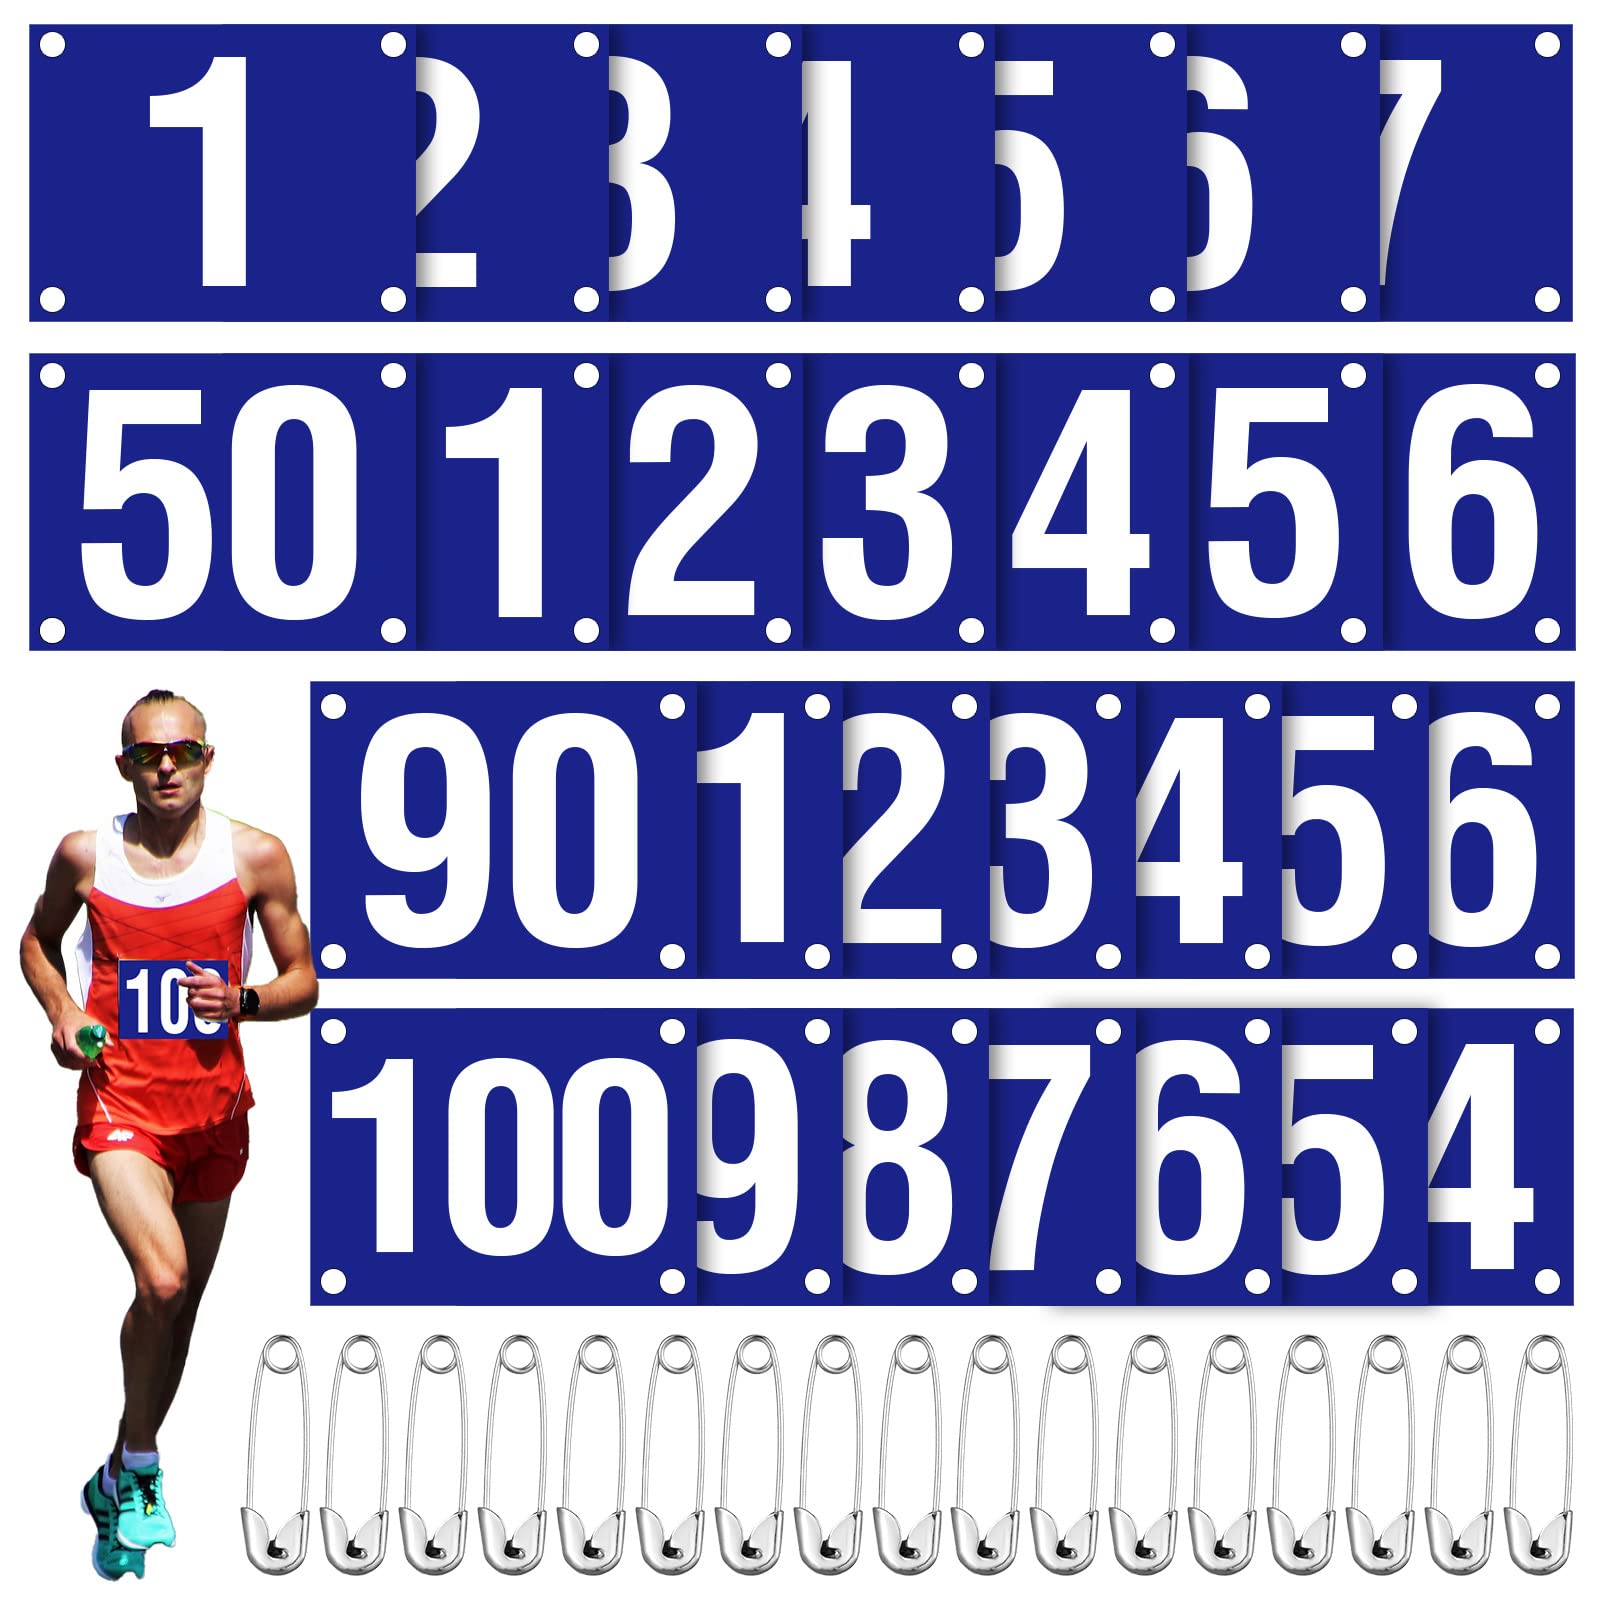 Buy Hanaive 200 Pieces Running Bib Numbers with Safety Pins for Marathon  Sports Competition Events Tearproof Waterproof, 6 x 7.5 Inch (1-200 Number)  Online at Low Prices in India 